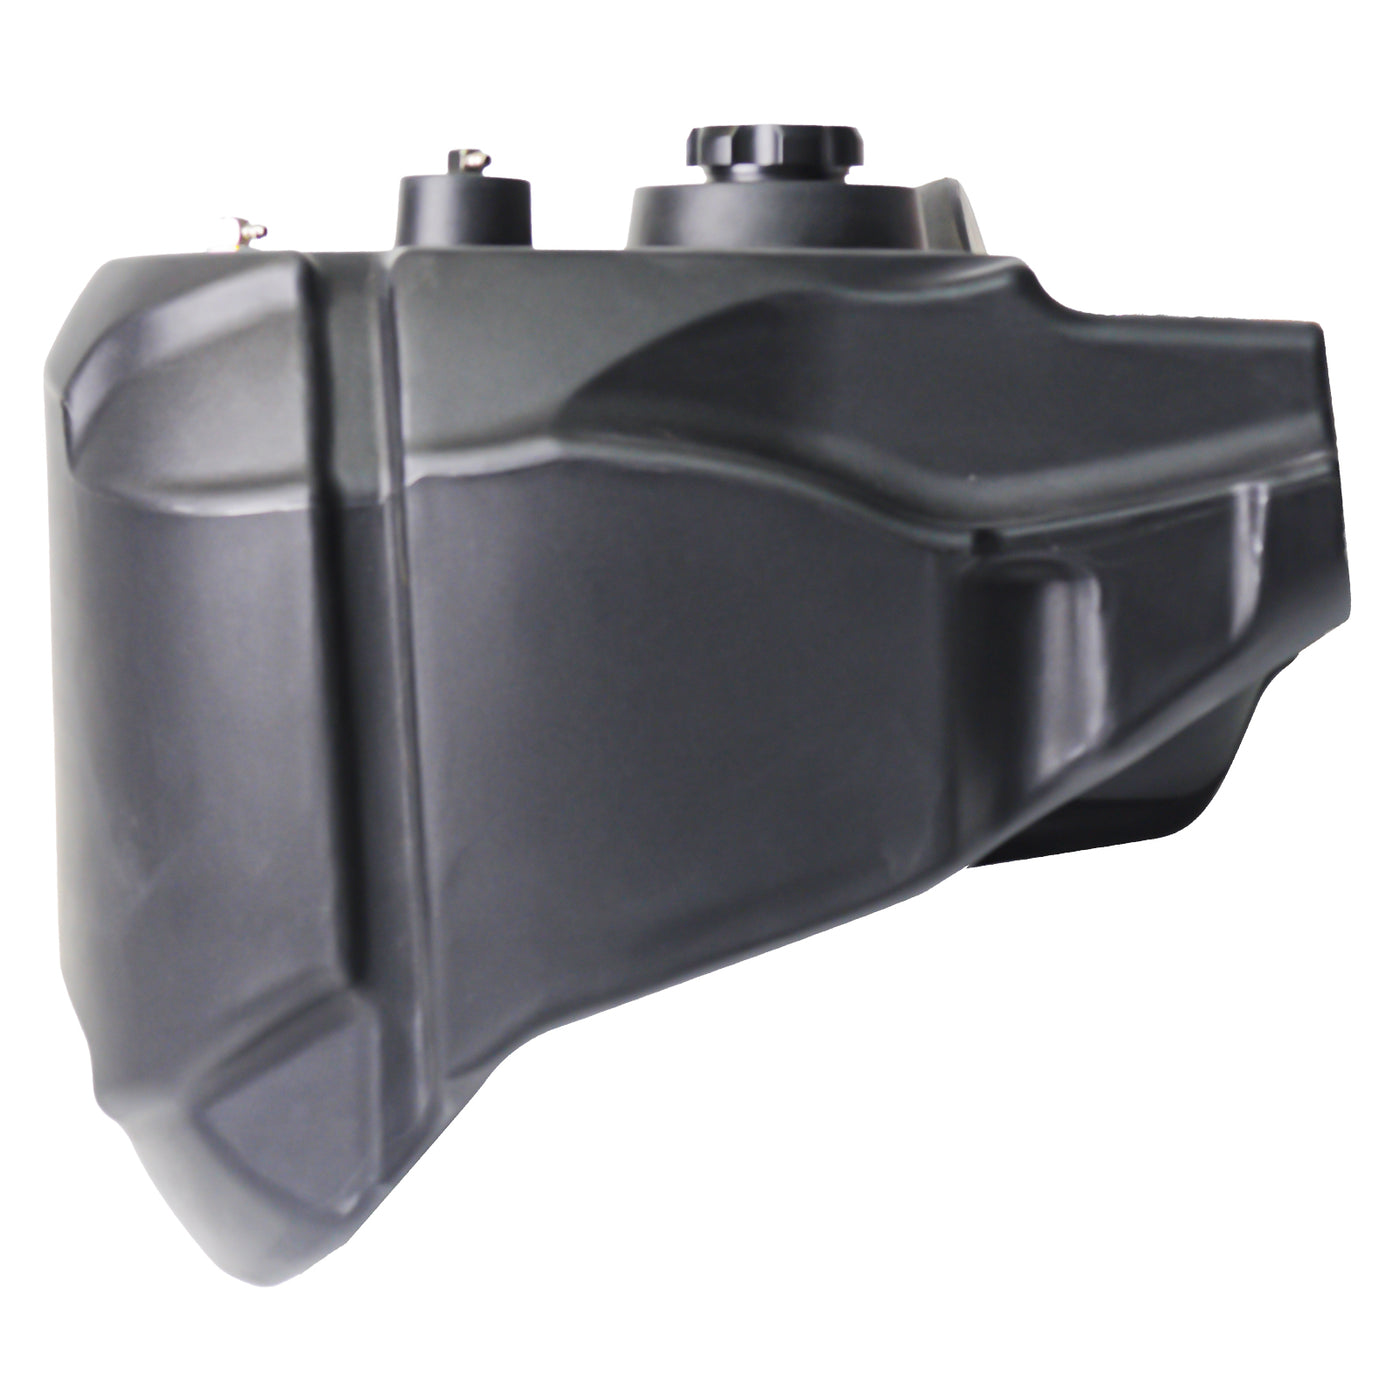 Honda Motorcycle Auxiliary Fuel Tank Made of PE Material for Forza350 (14.17x10.63x12.20 inches, 13L)